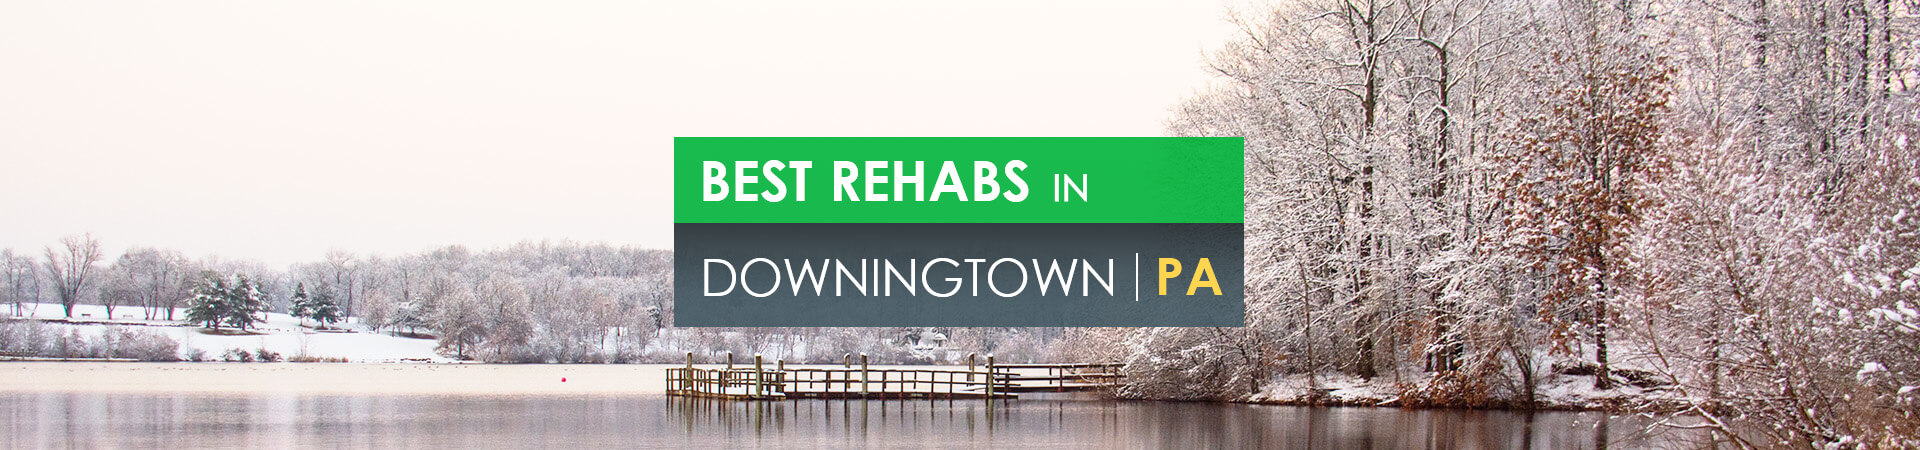 Best rehabs in Downingtown, PA